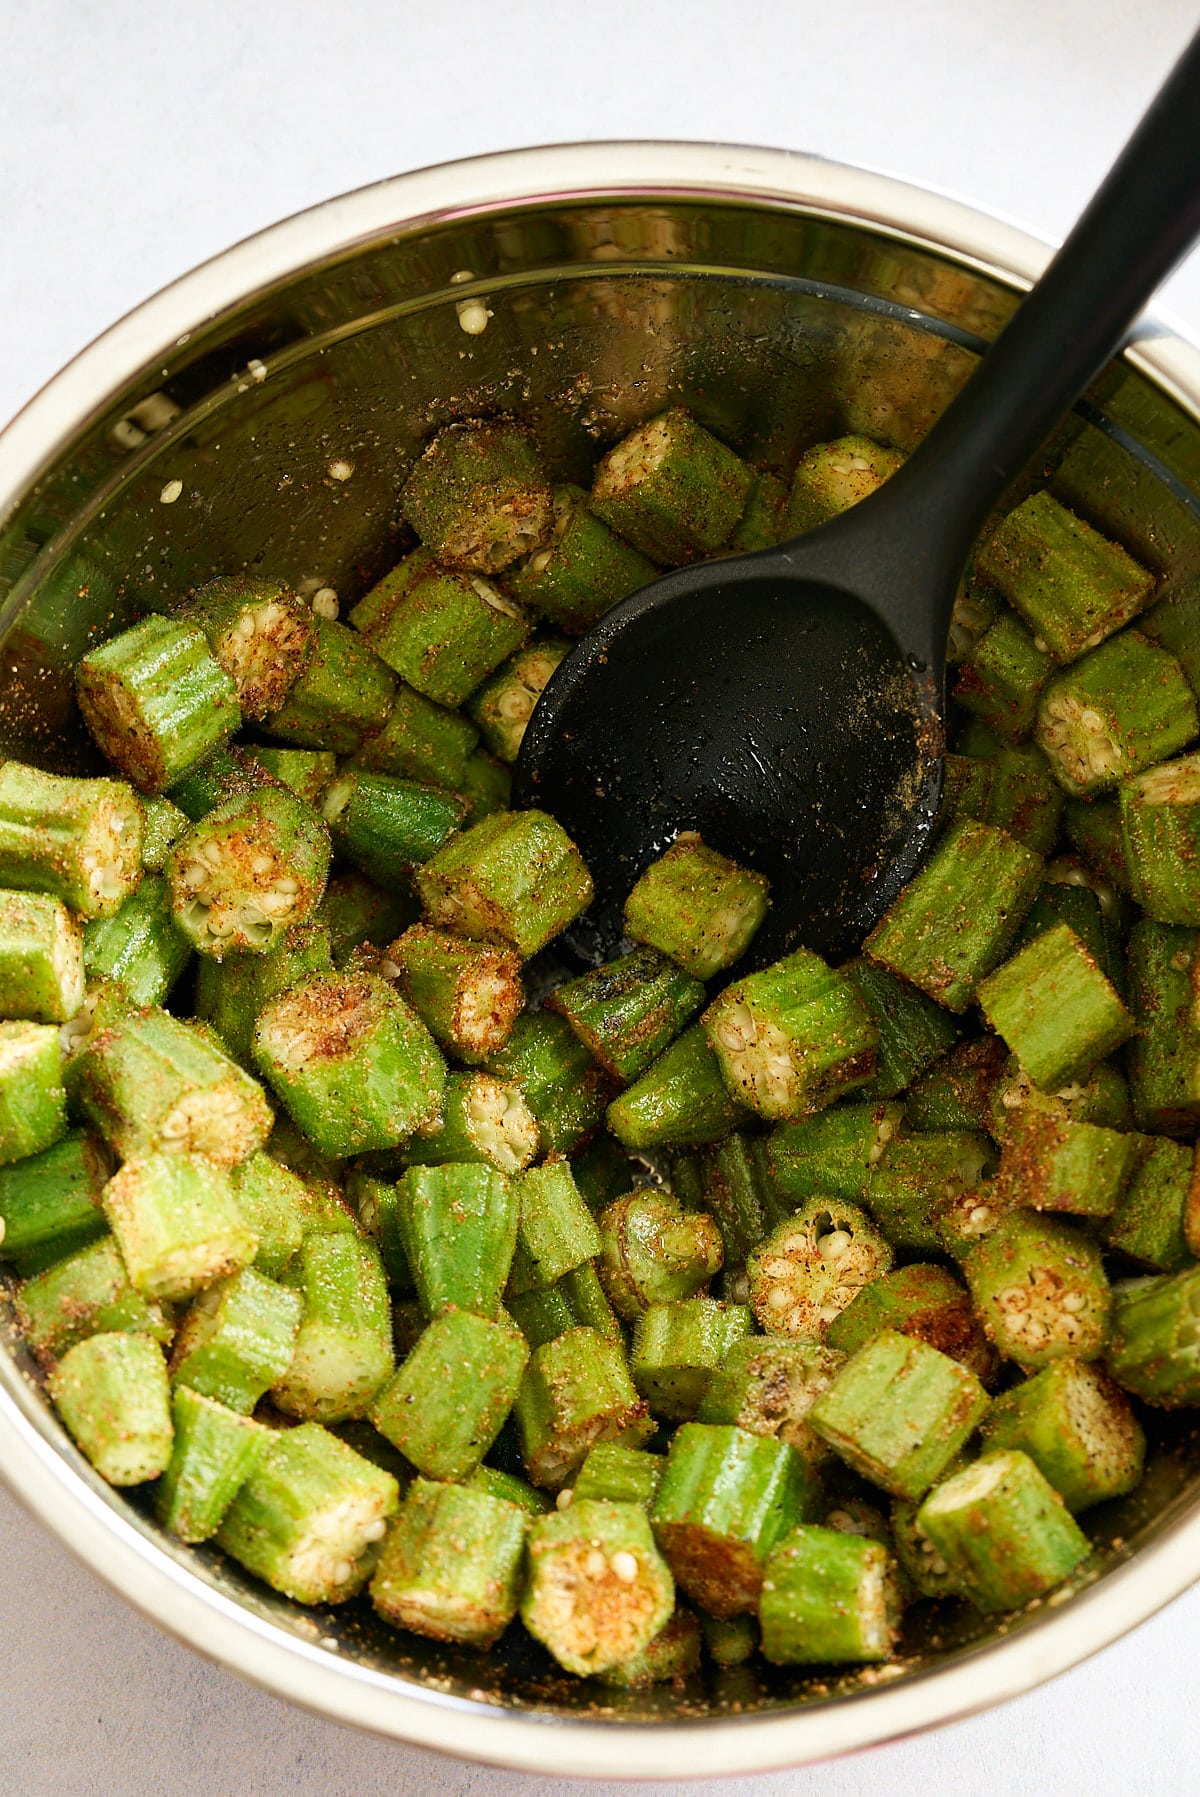 A silver bowl filled with sliced okra, covered in a blend of salt and spices.